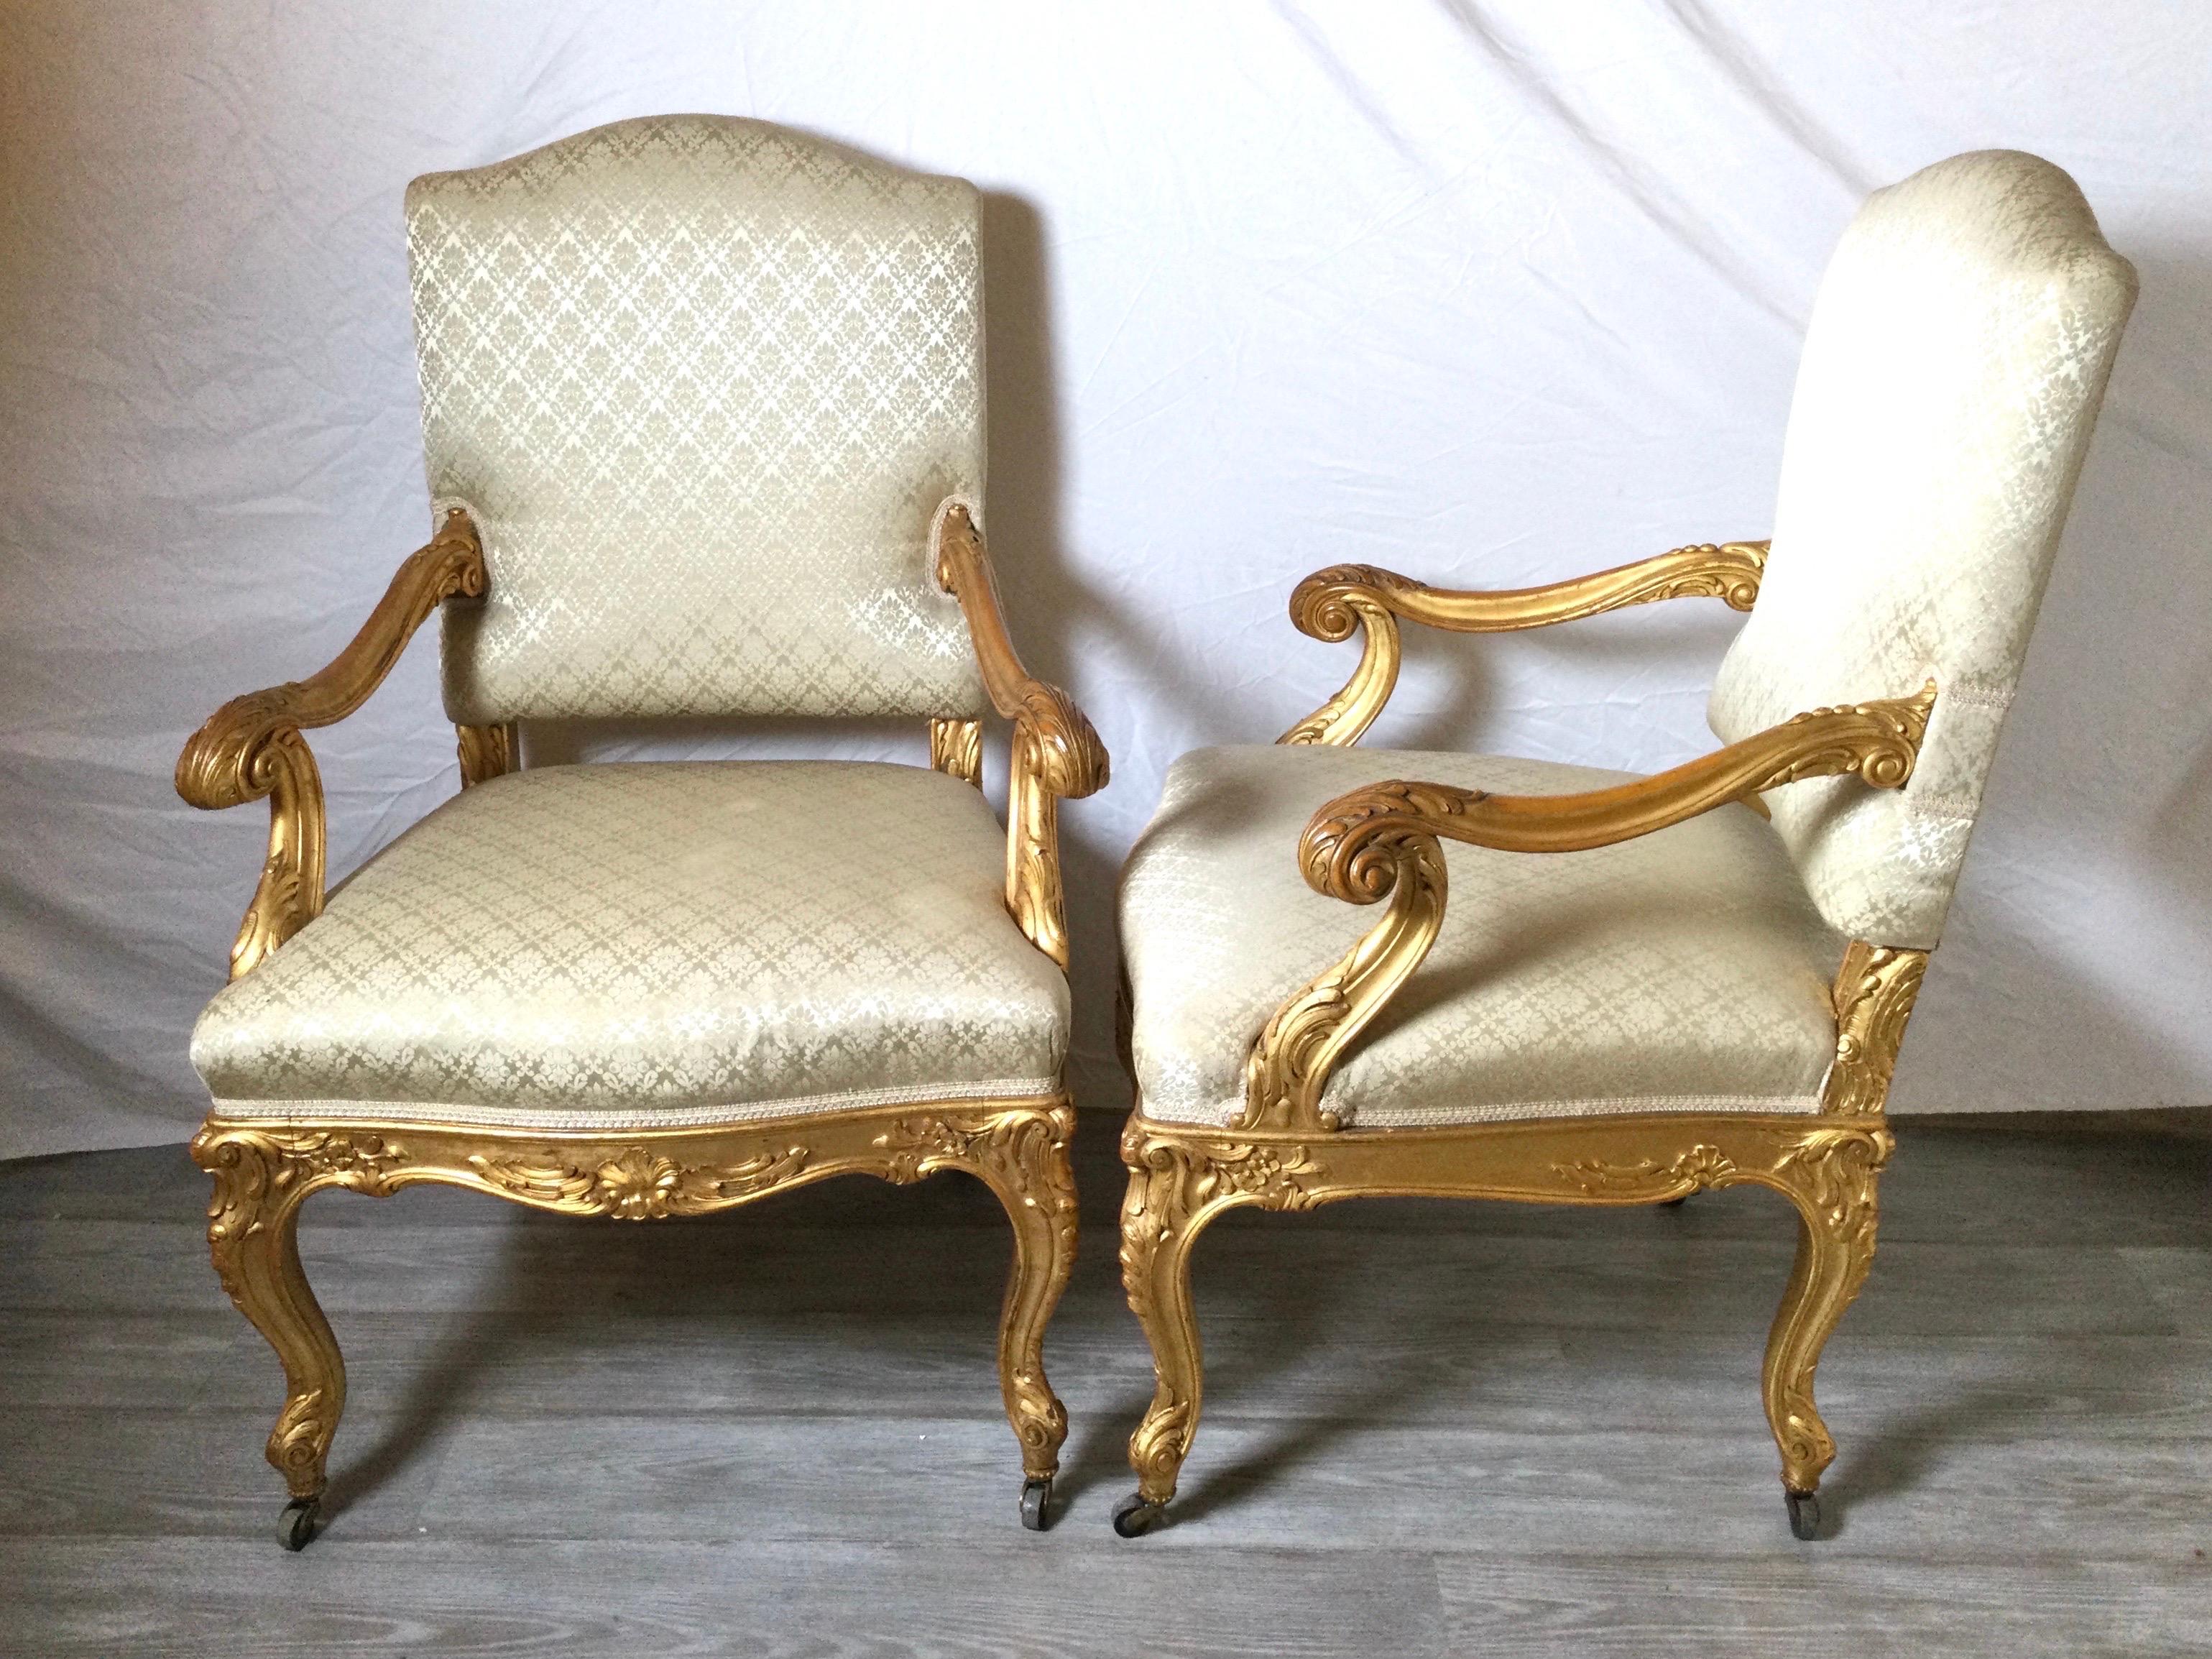 Gilt Exceptional Pair of Antique French Fauteuil Chairs